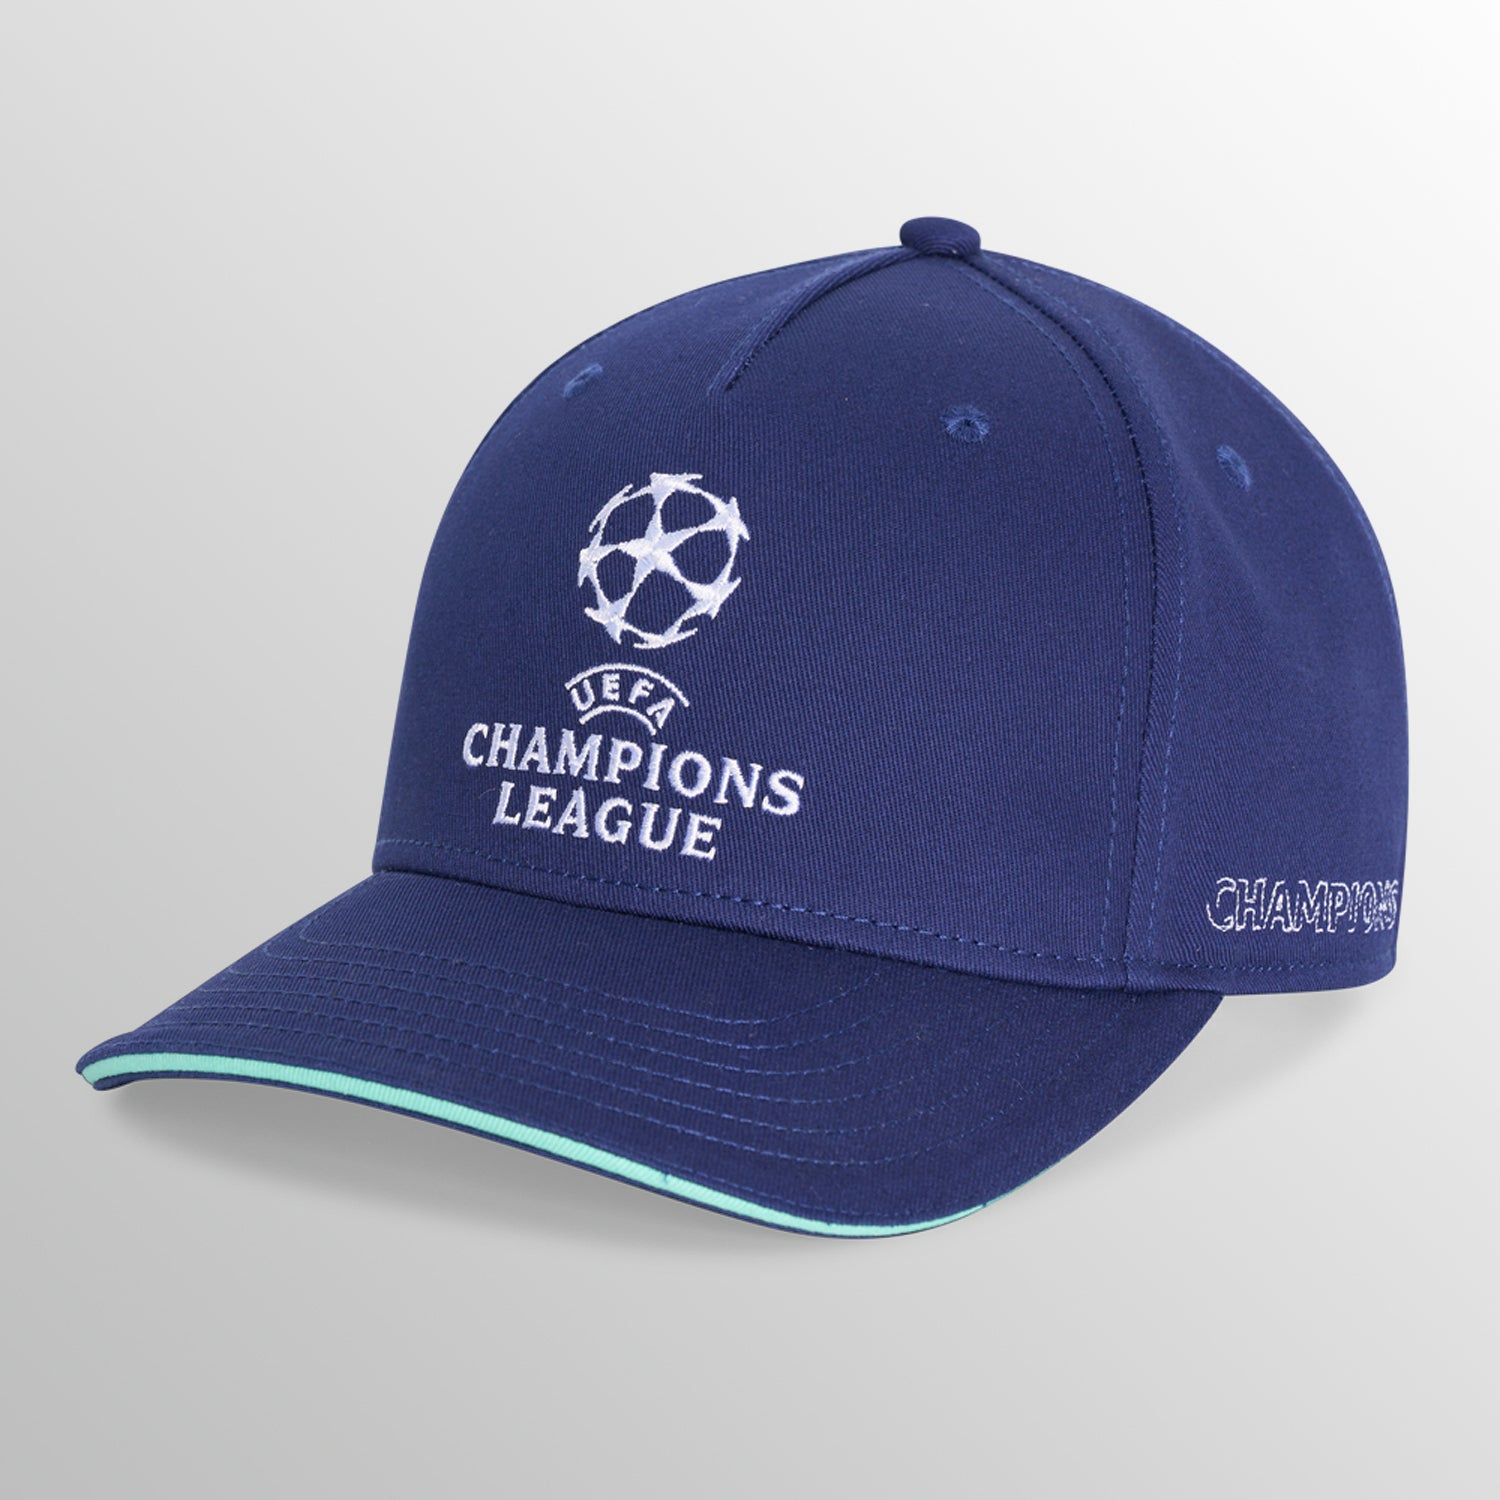 UEFA Champions League - Trophy Grunge Navy T-Shirt UEFA Club Competitions  Online Store